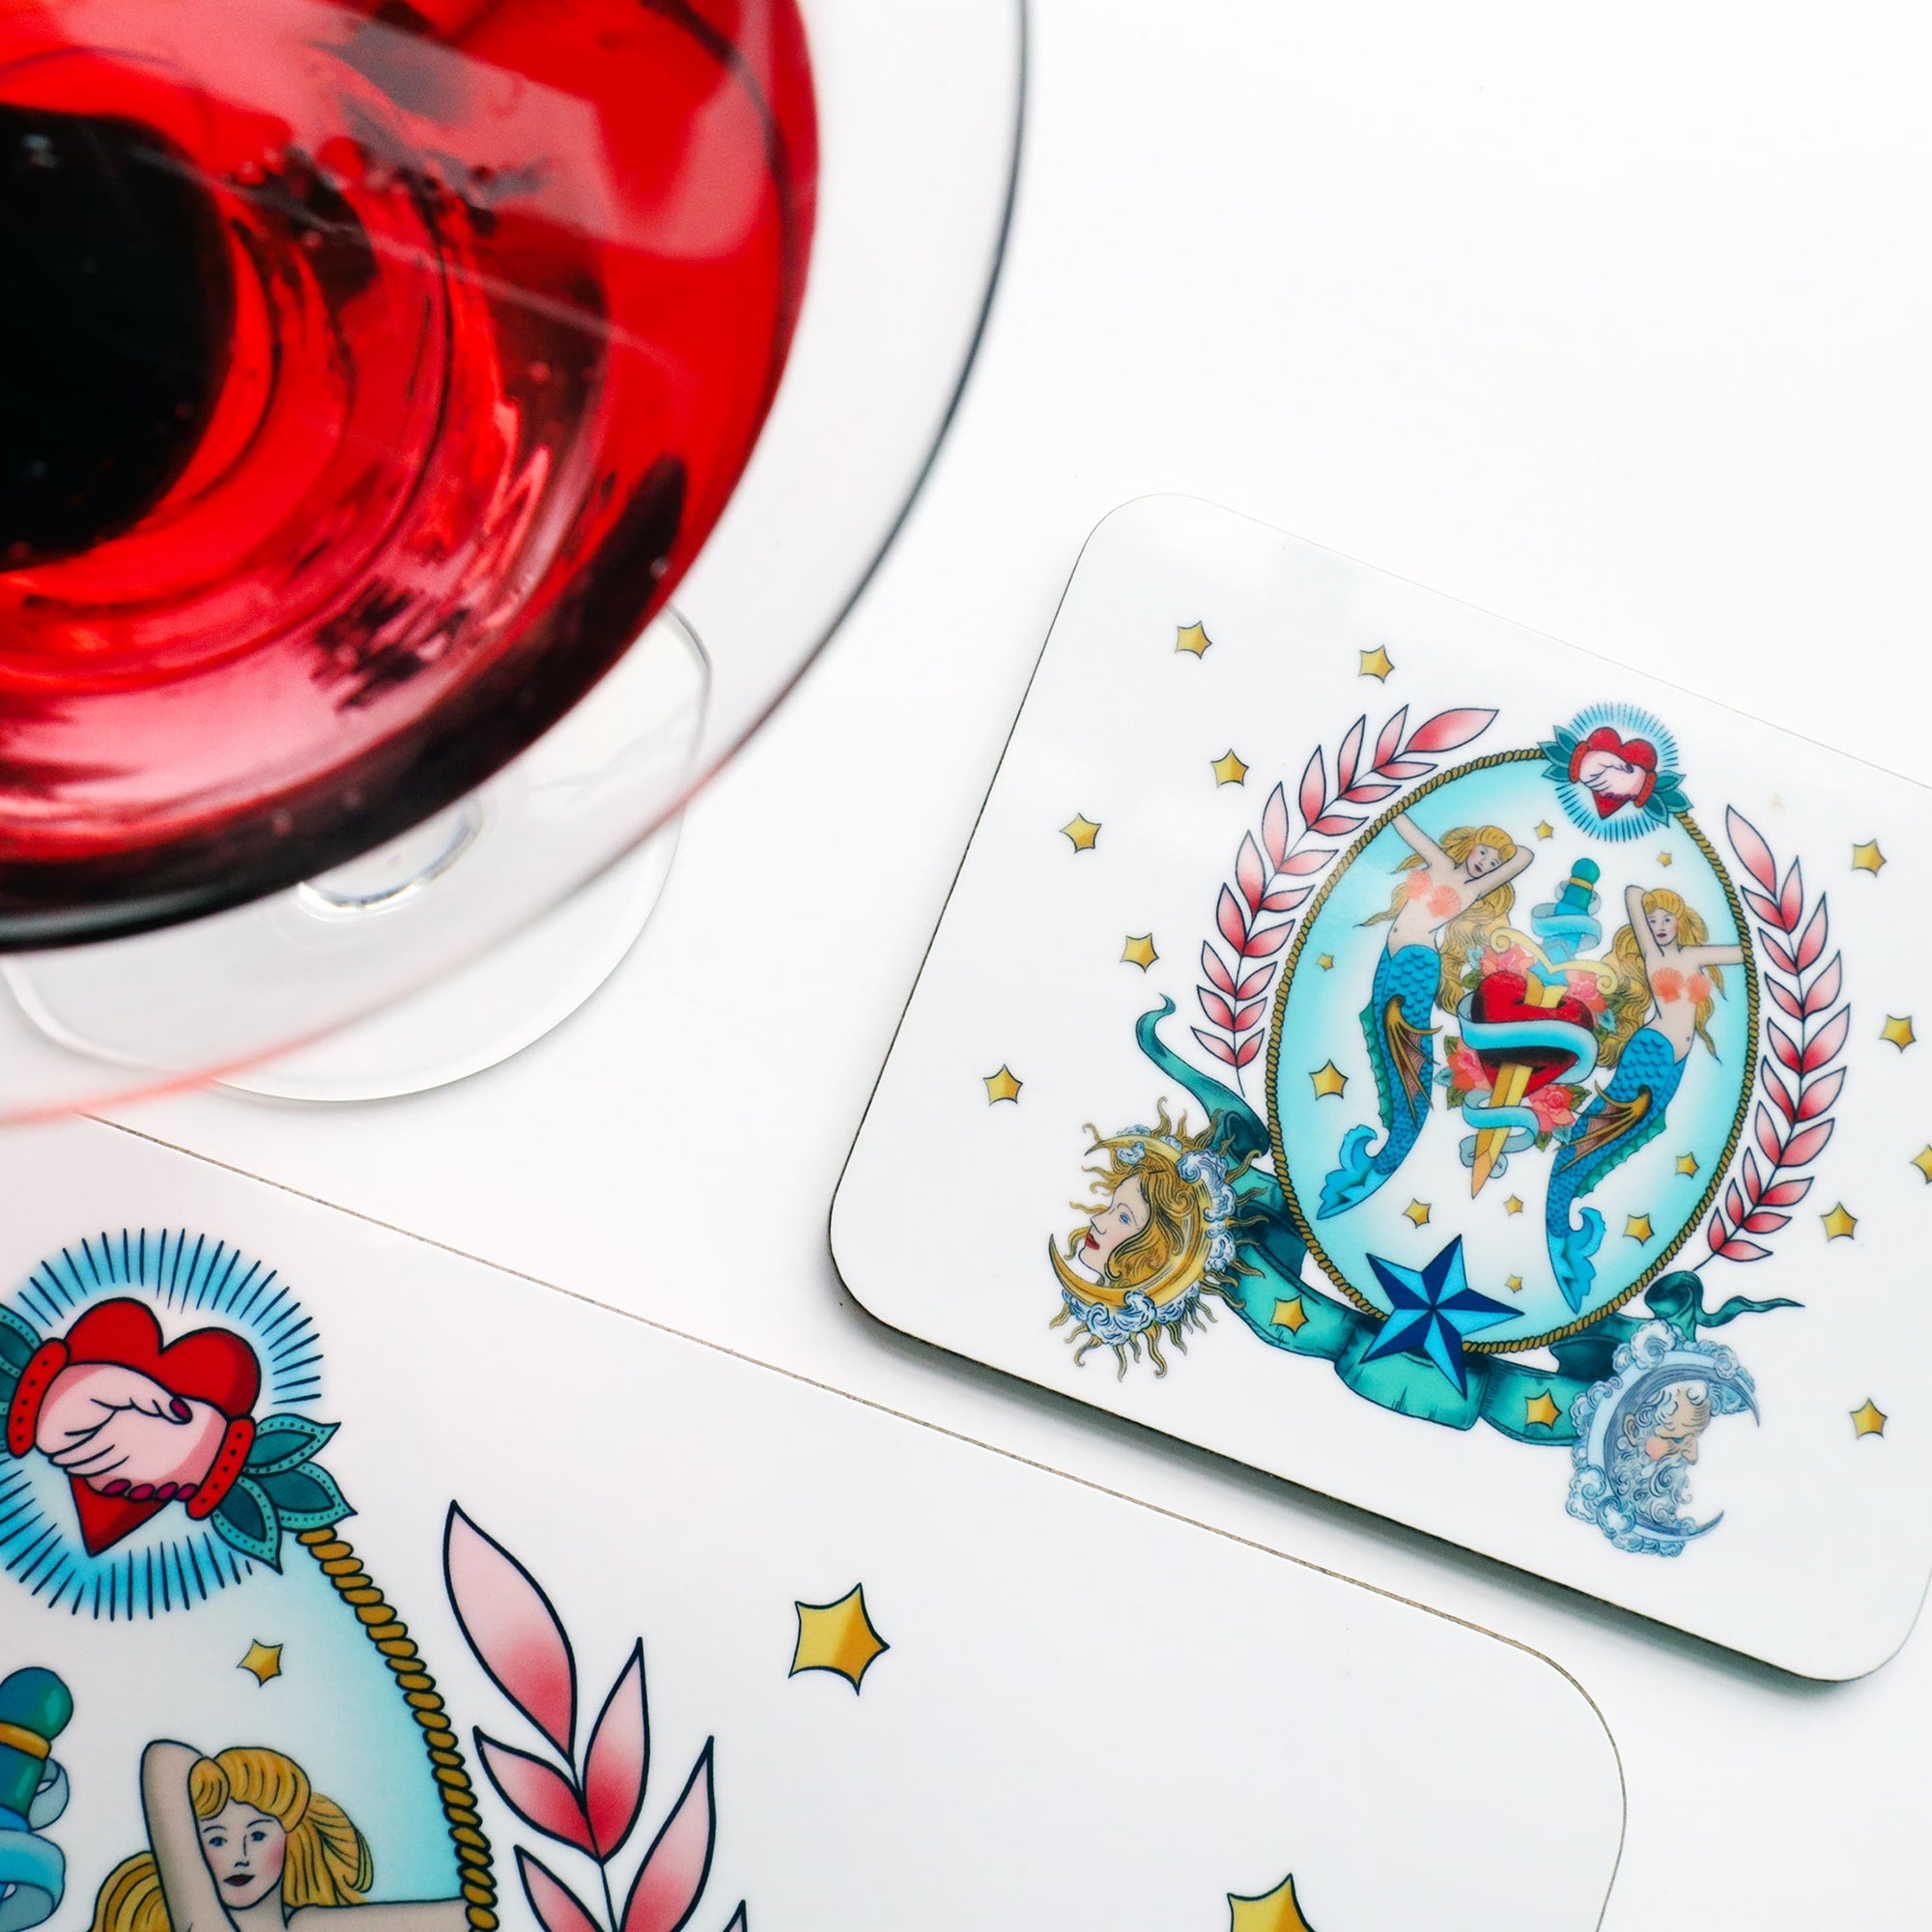 Melamine coaster with a sailors tattoos inspired illustration of mermaids, heart and dagger in a vignette of pink laurel, rope and sun and moon faces. There is the corner of the matching placemat just visible as well as a red cocktail in the top left corner. 